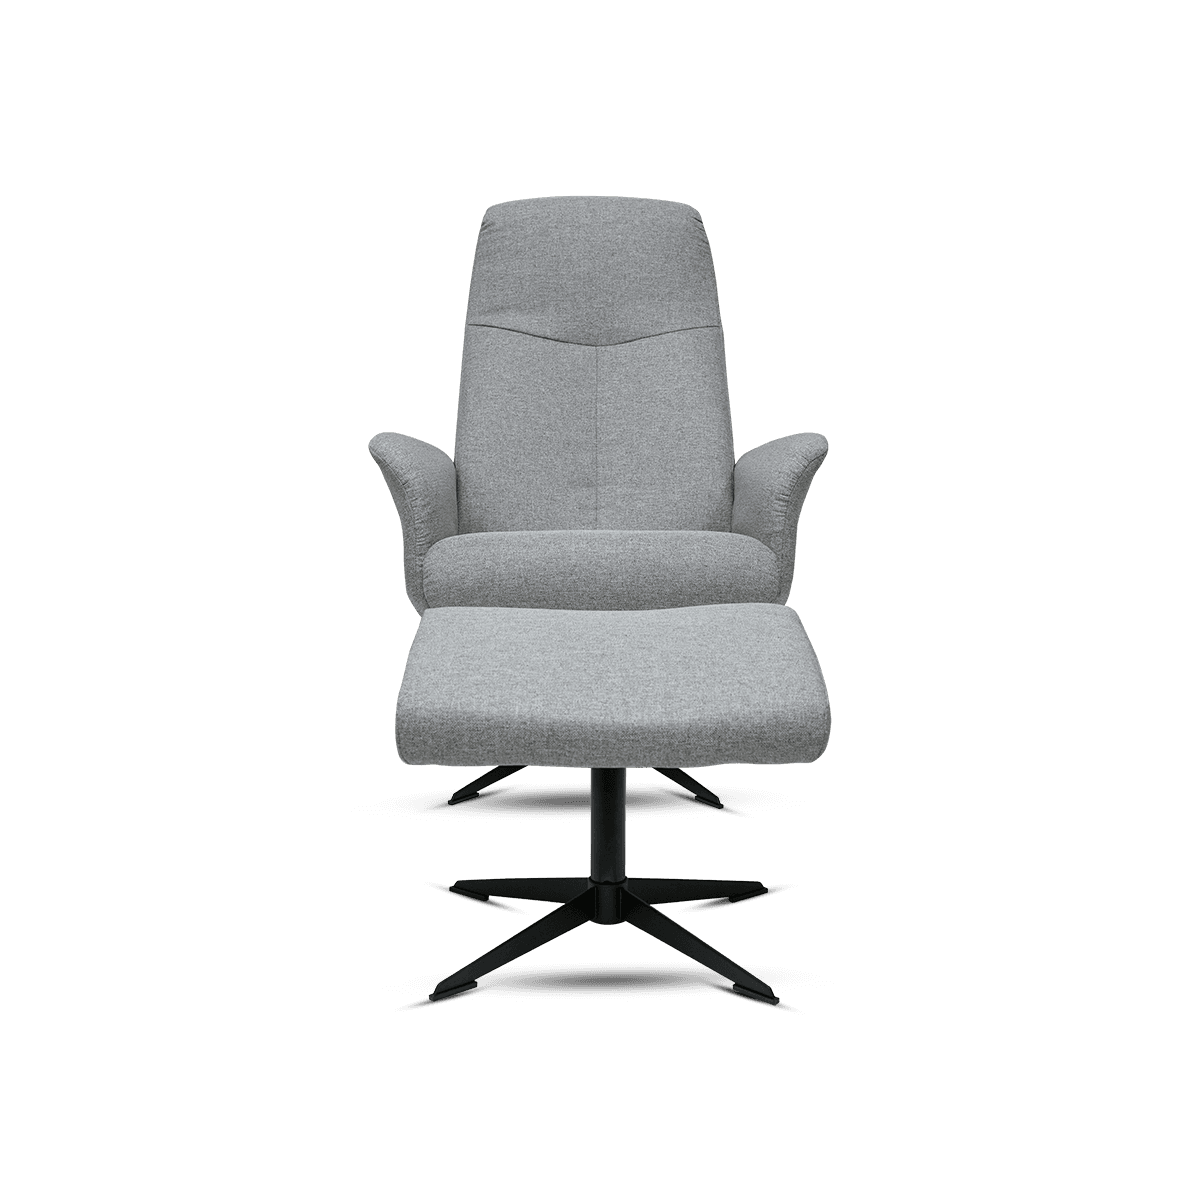 Montana Recliner Chair with Foot Stool, Lt Grey